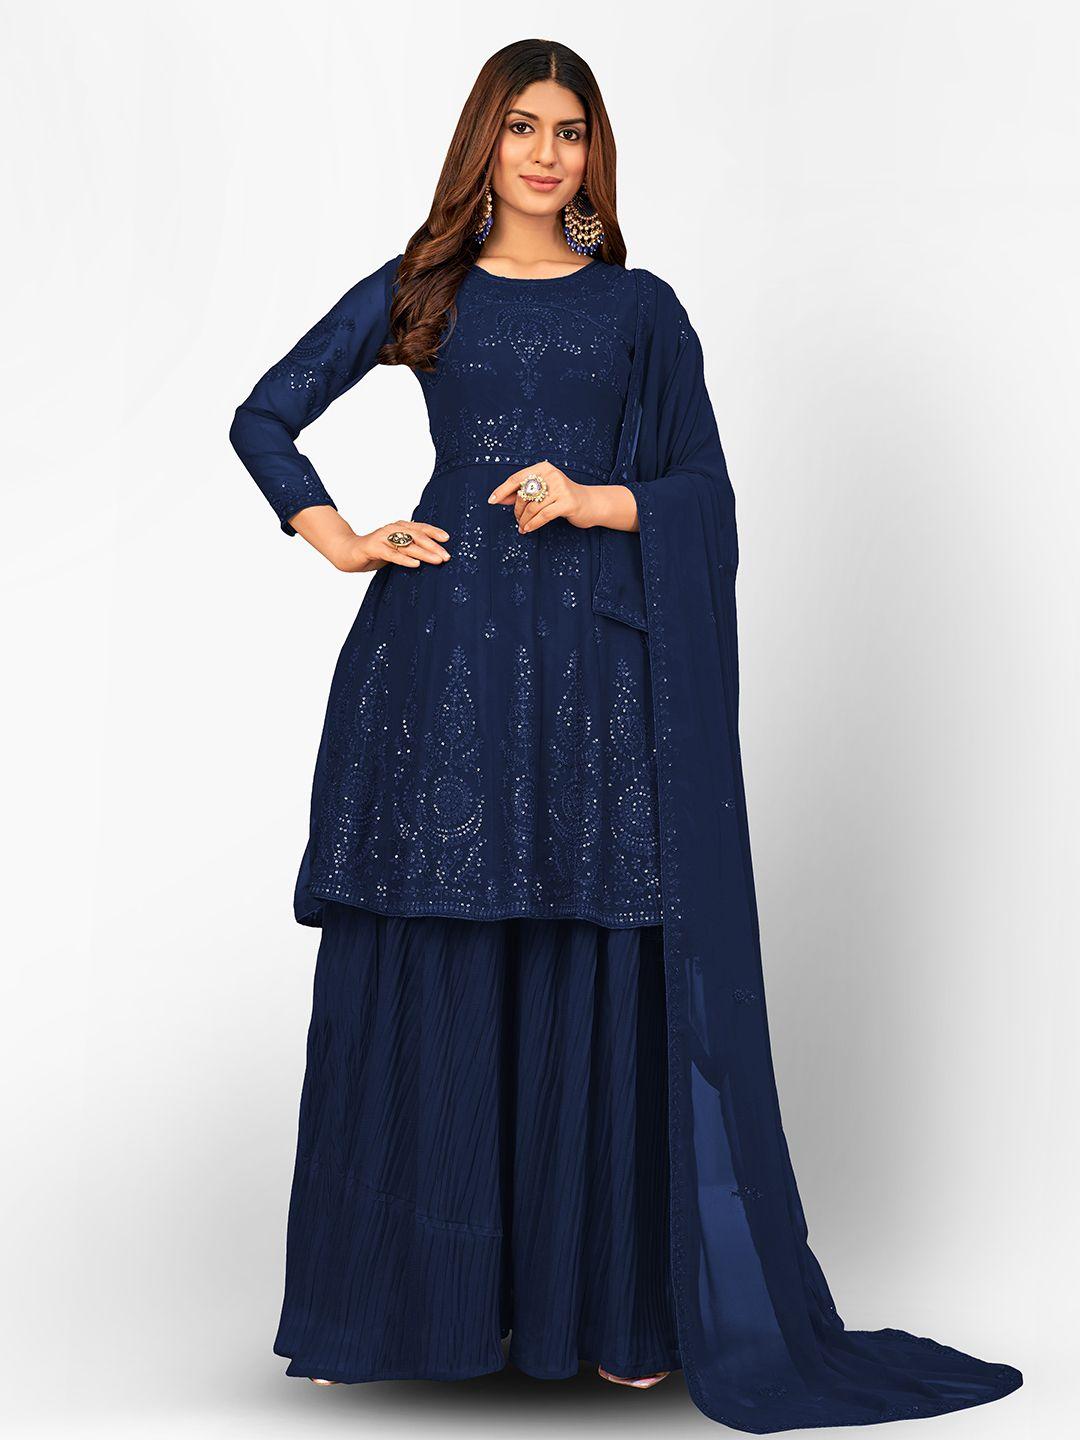 divine-international-trading-co-blue-embroidered-unstitched-dress-material